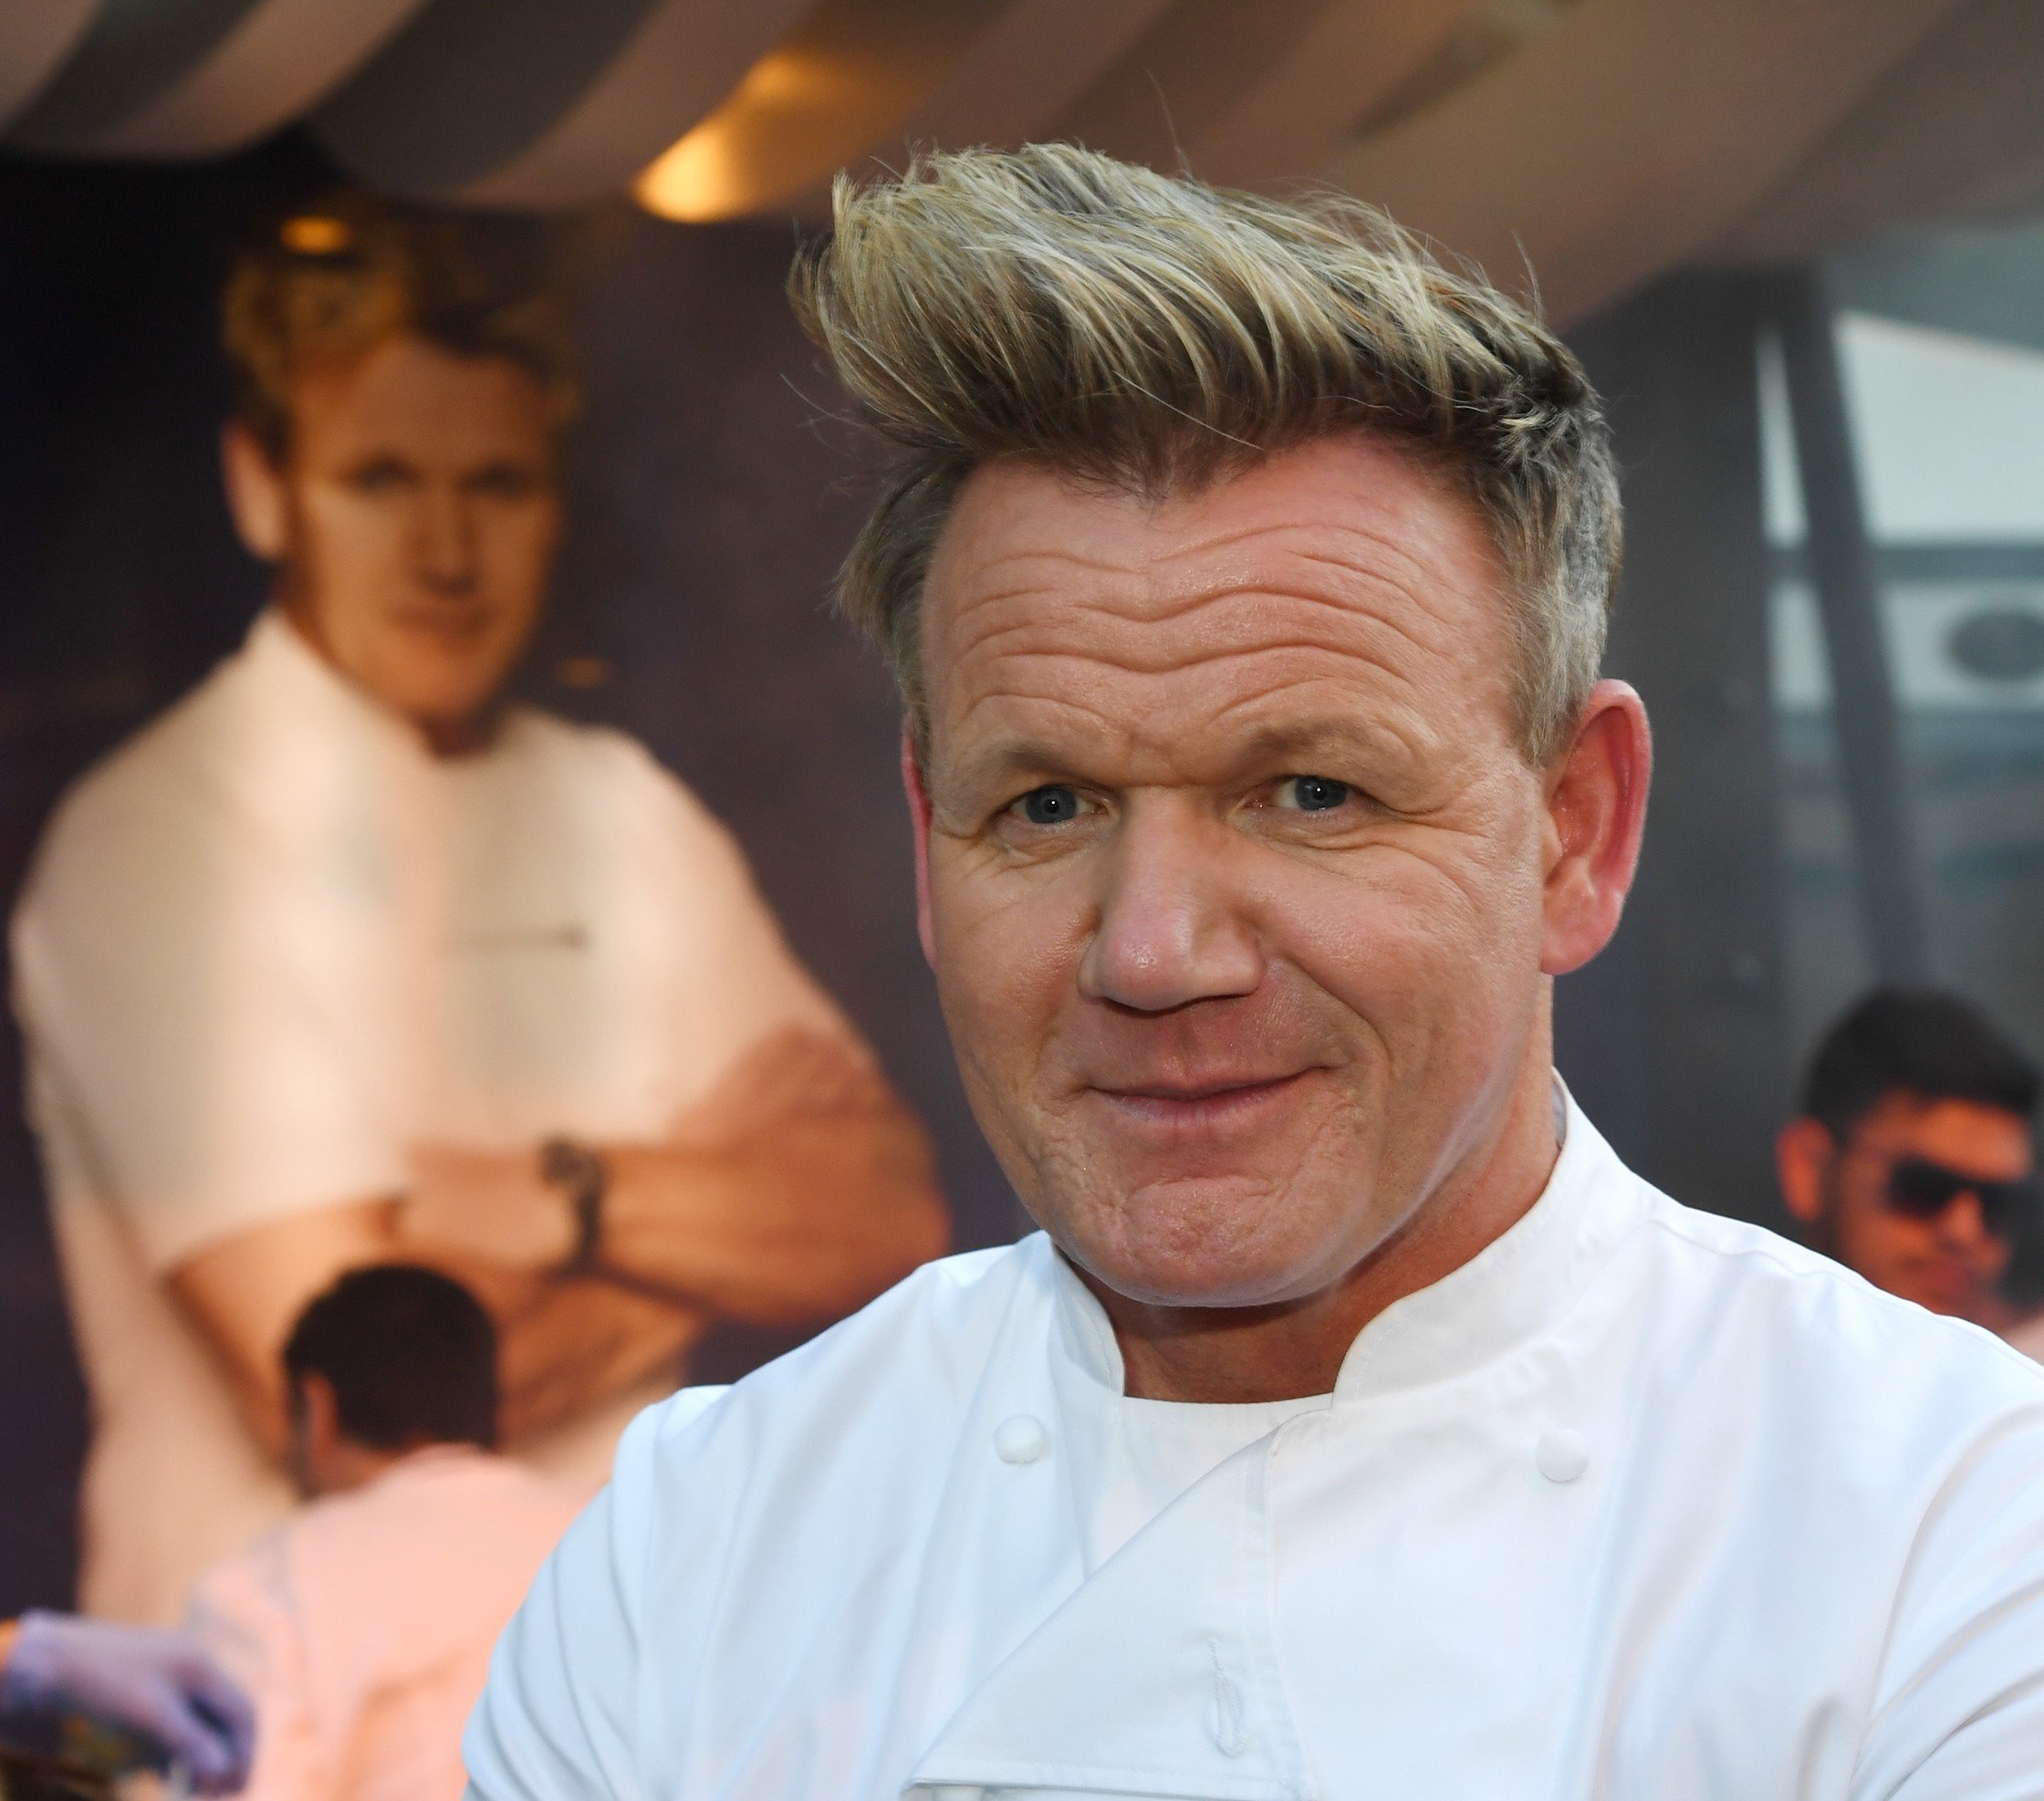 Gordon Ramsay Finds This ‘Disgusting’ About a ‘Delicious’ Burger